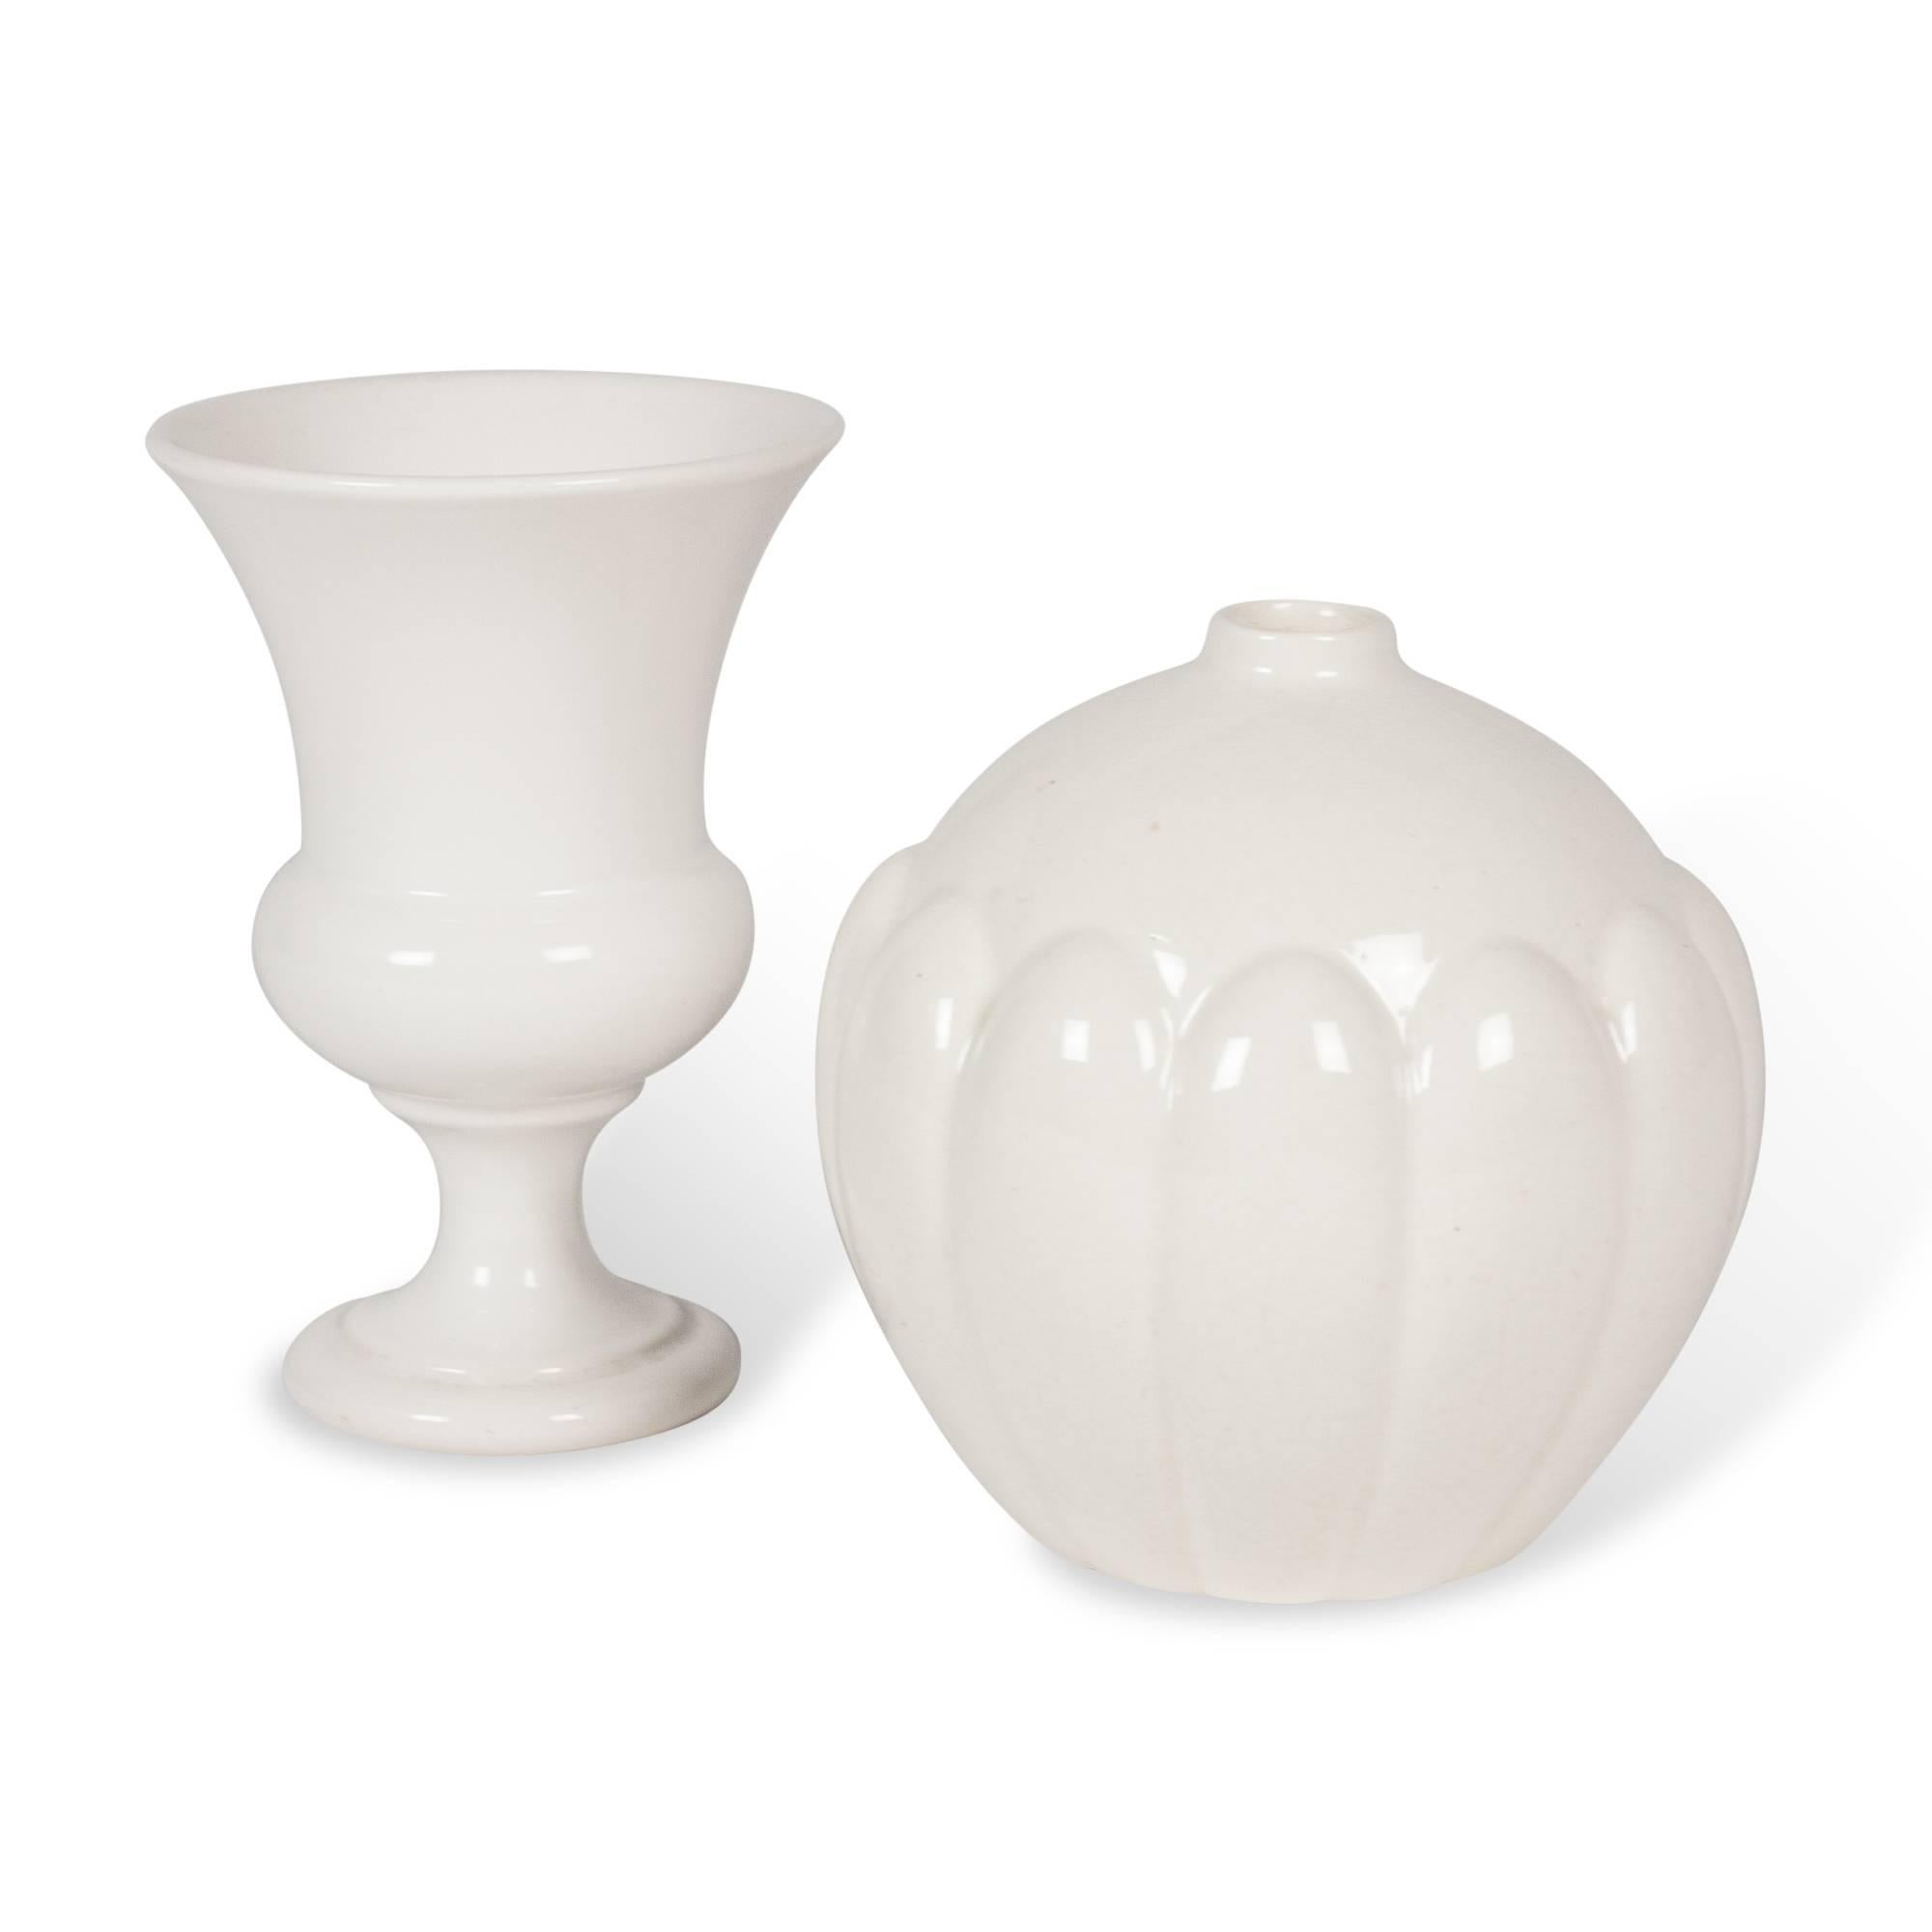 Two White Ceramic Vases, French, 1930s In Excellent Condition For Sale In Brooklyn, NY